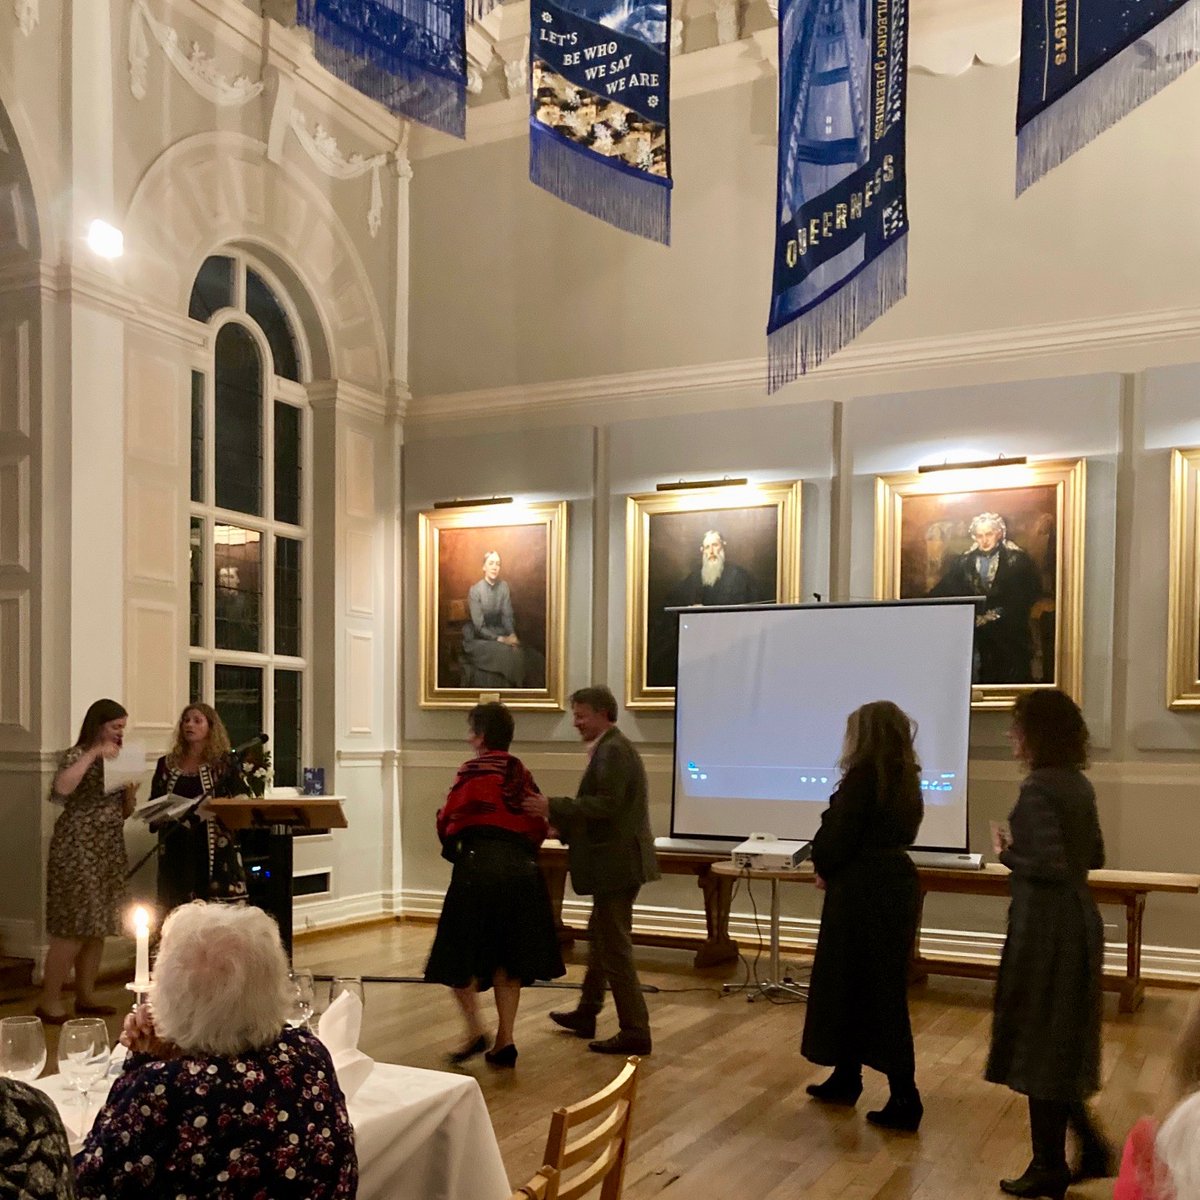 Adieu to @Newnham_College, who made me feel so welcome during my tenure as RLF Writing Fellow. Touched & honoured to be included in a special evening of send-offs, including farewells to Newnham legends @wmarybeard & @HMTruscott. Thank you Newnham, always in my heart @rlfwriters